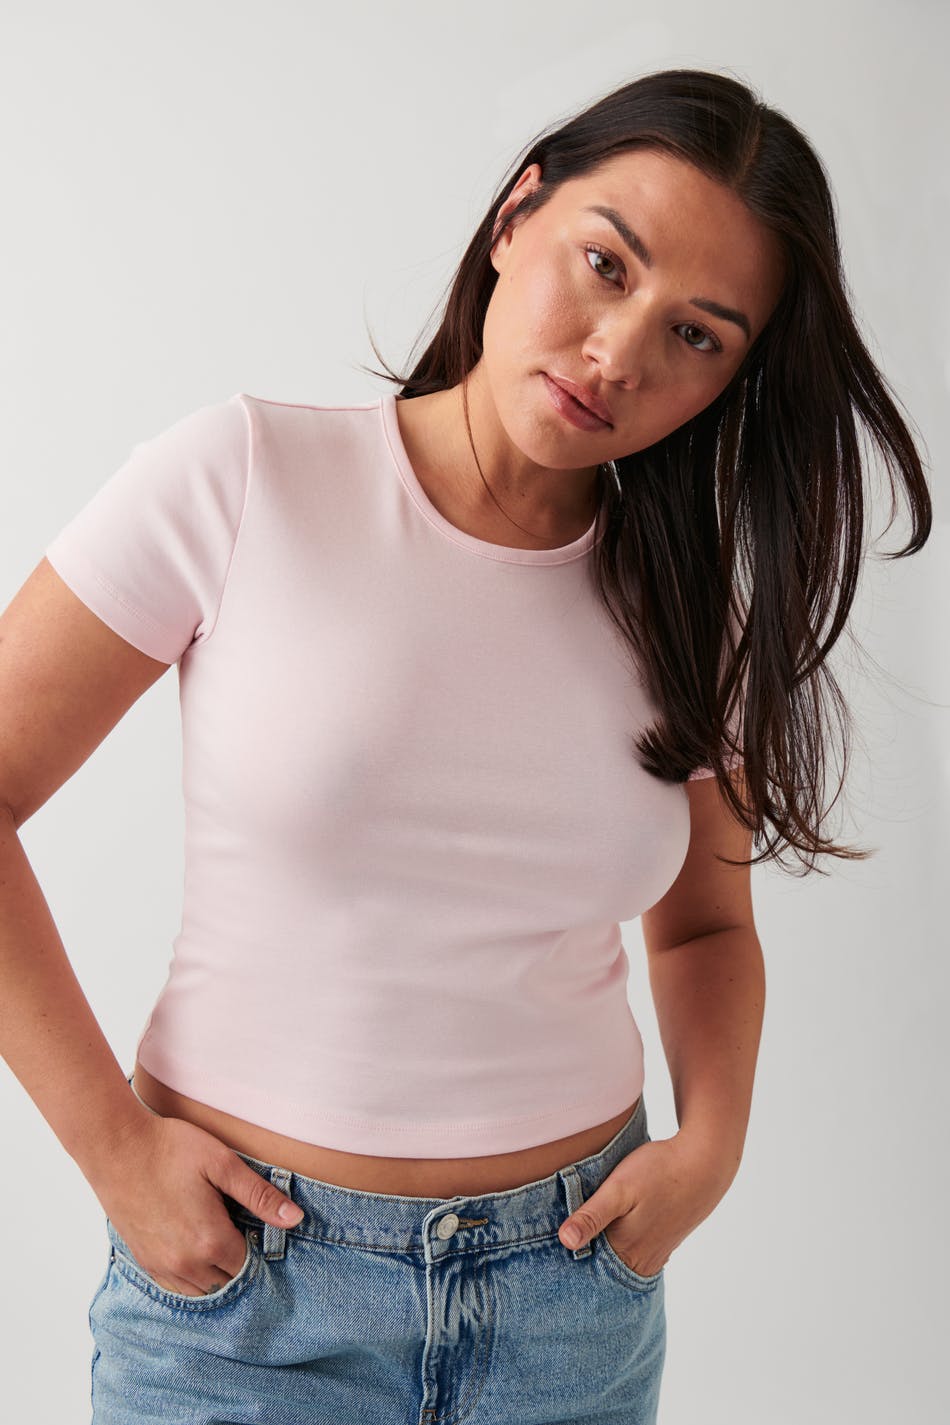 NKOOGH Summer Top for Women Pink Turtle Neck Top for Women Pack